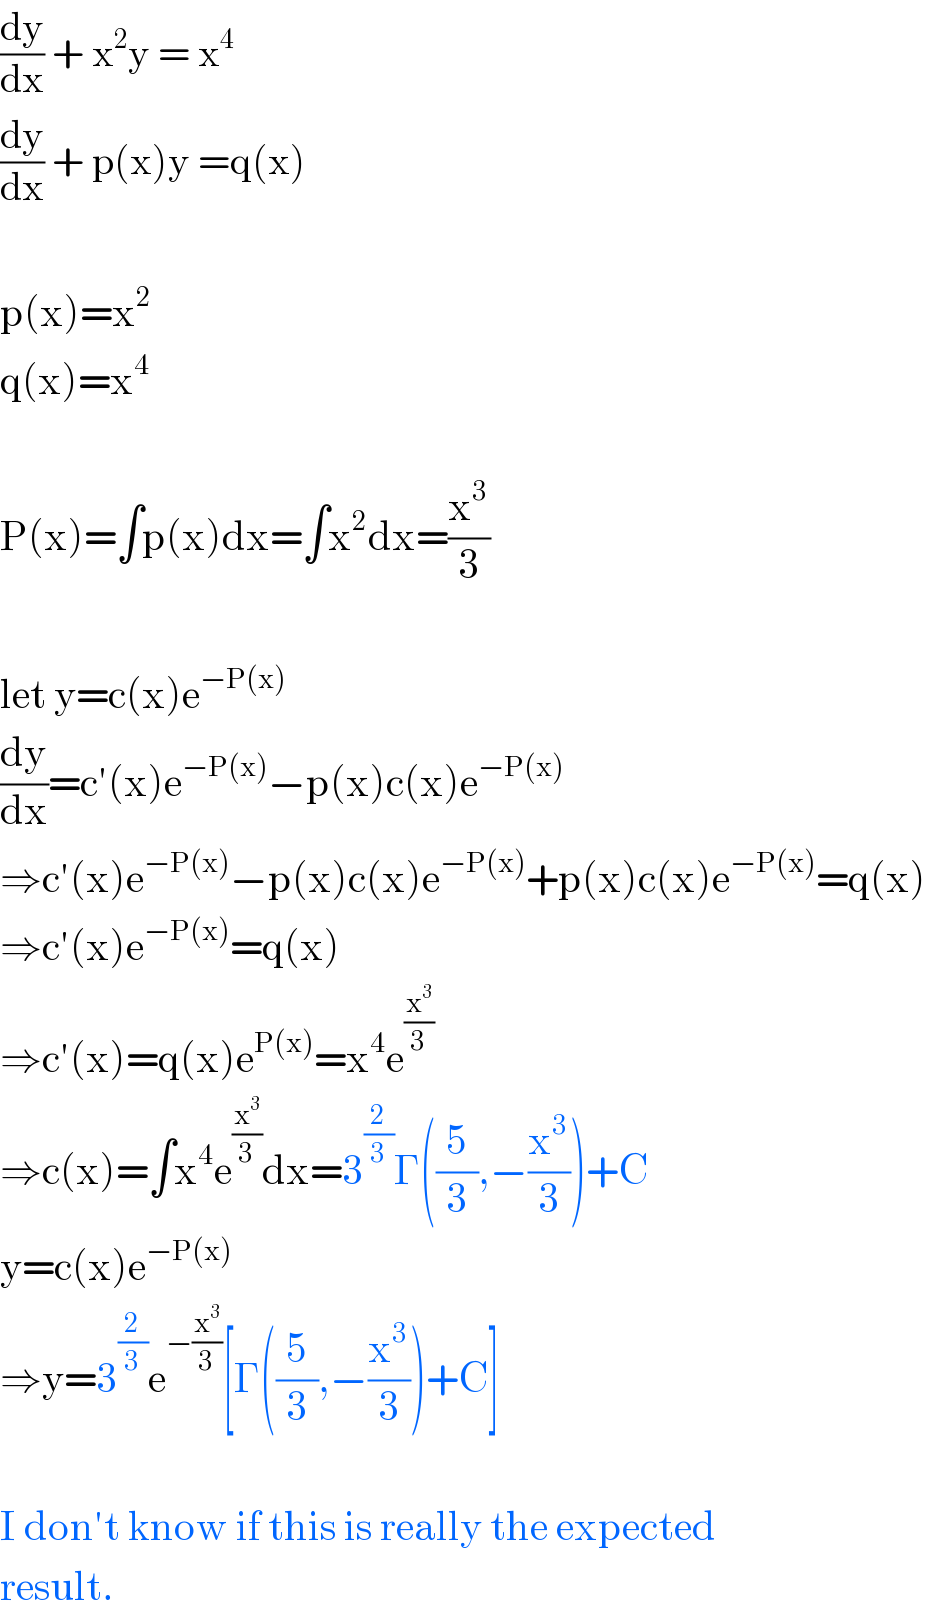 (dy/dx) + x^2 y = x^4   (dy/dx) + p(x)y =q(x)    p(x)=x^2   q(x)=x^4     P(x)=∫p(x)dx=∫x^2 dx=(x^3 /3)    let y=c(x)e^(−P(x))   (dy/dx)=c′(x)e^(−P(x)) −p(x)c(x)e^(−P(x))   ⇒c′(x)e^(−P(x)) −p(x)c(x)e^(−P(x)) +p(x)c(x)e^(−P(x)) =q(x)  ⇒c′(x)e^(−P(x)) =q(x)  ⇒c′(x)=q(x)e^(P(x)) =x^4 e^(x^3 /3)   ⇒c(x)=∫x^4 e^(x^3 /3) dx=3^(2/3) Γ((5/3),−(x^3 /3))+C  y=c(x)e^(−P(x))   ⇒y=3^(2/3) e^(−(x^3 /3)) [Γ((5/3),−(x^3 /3))+C]    I don′t know if this is really the expected  result.  